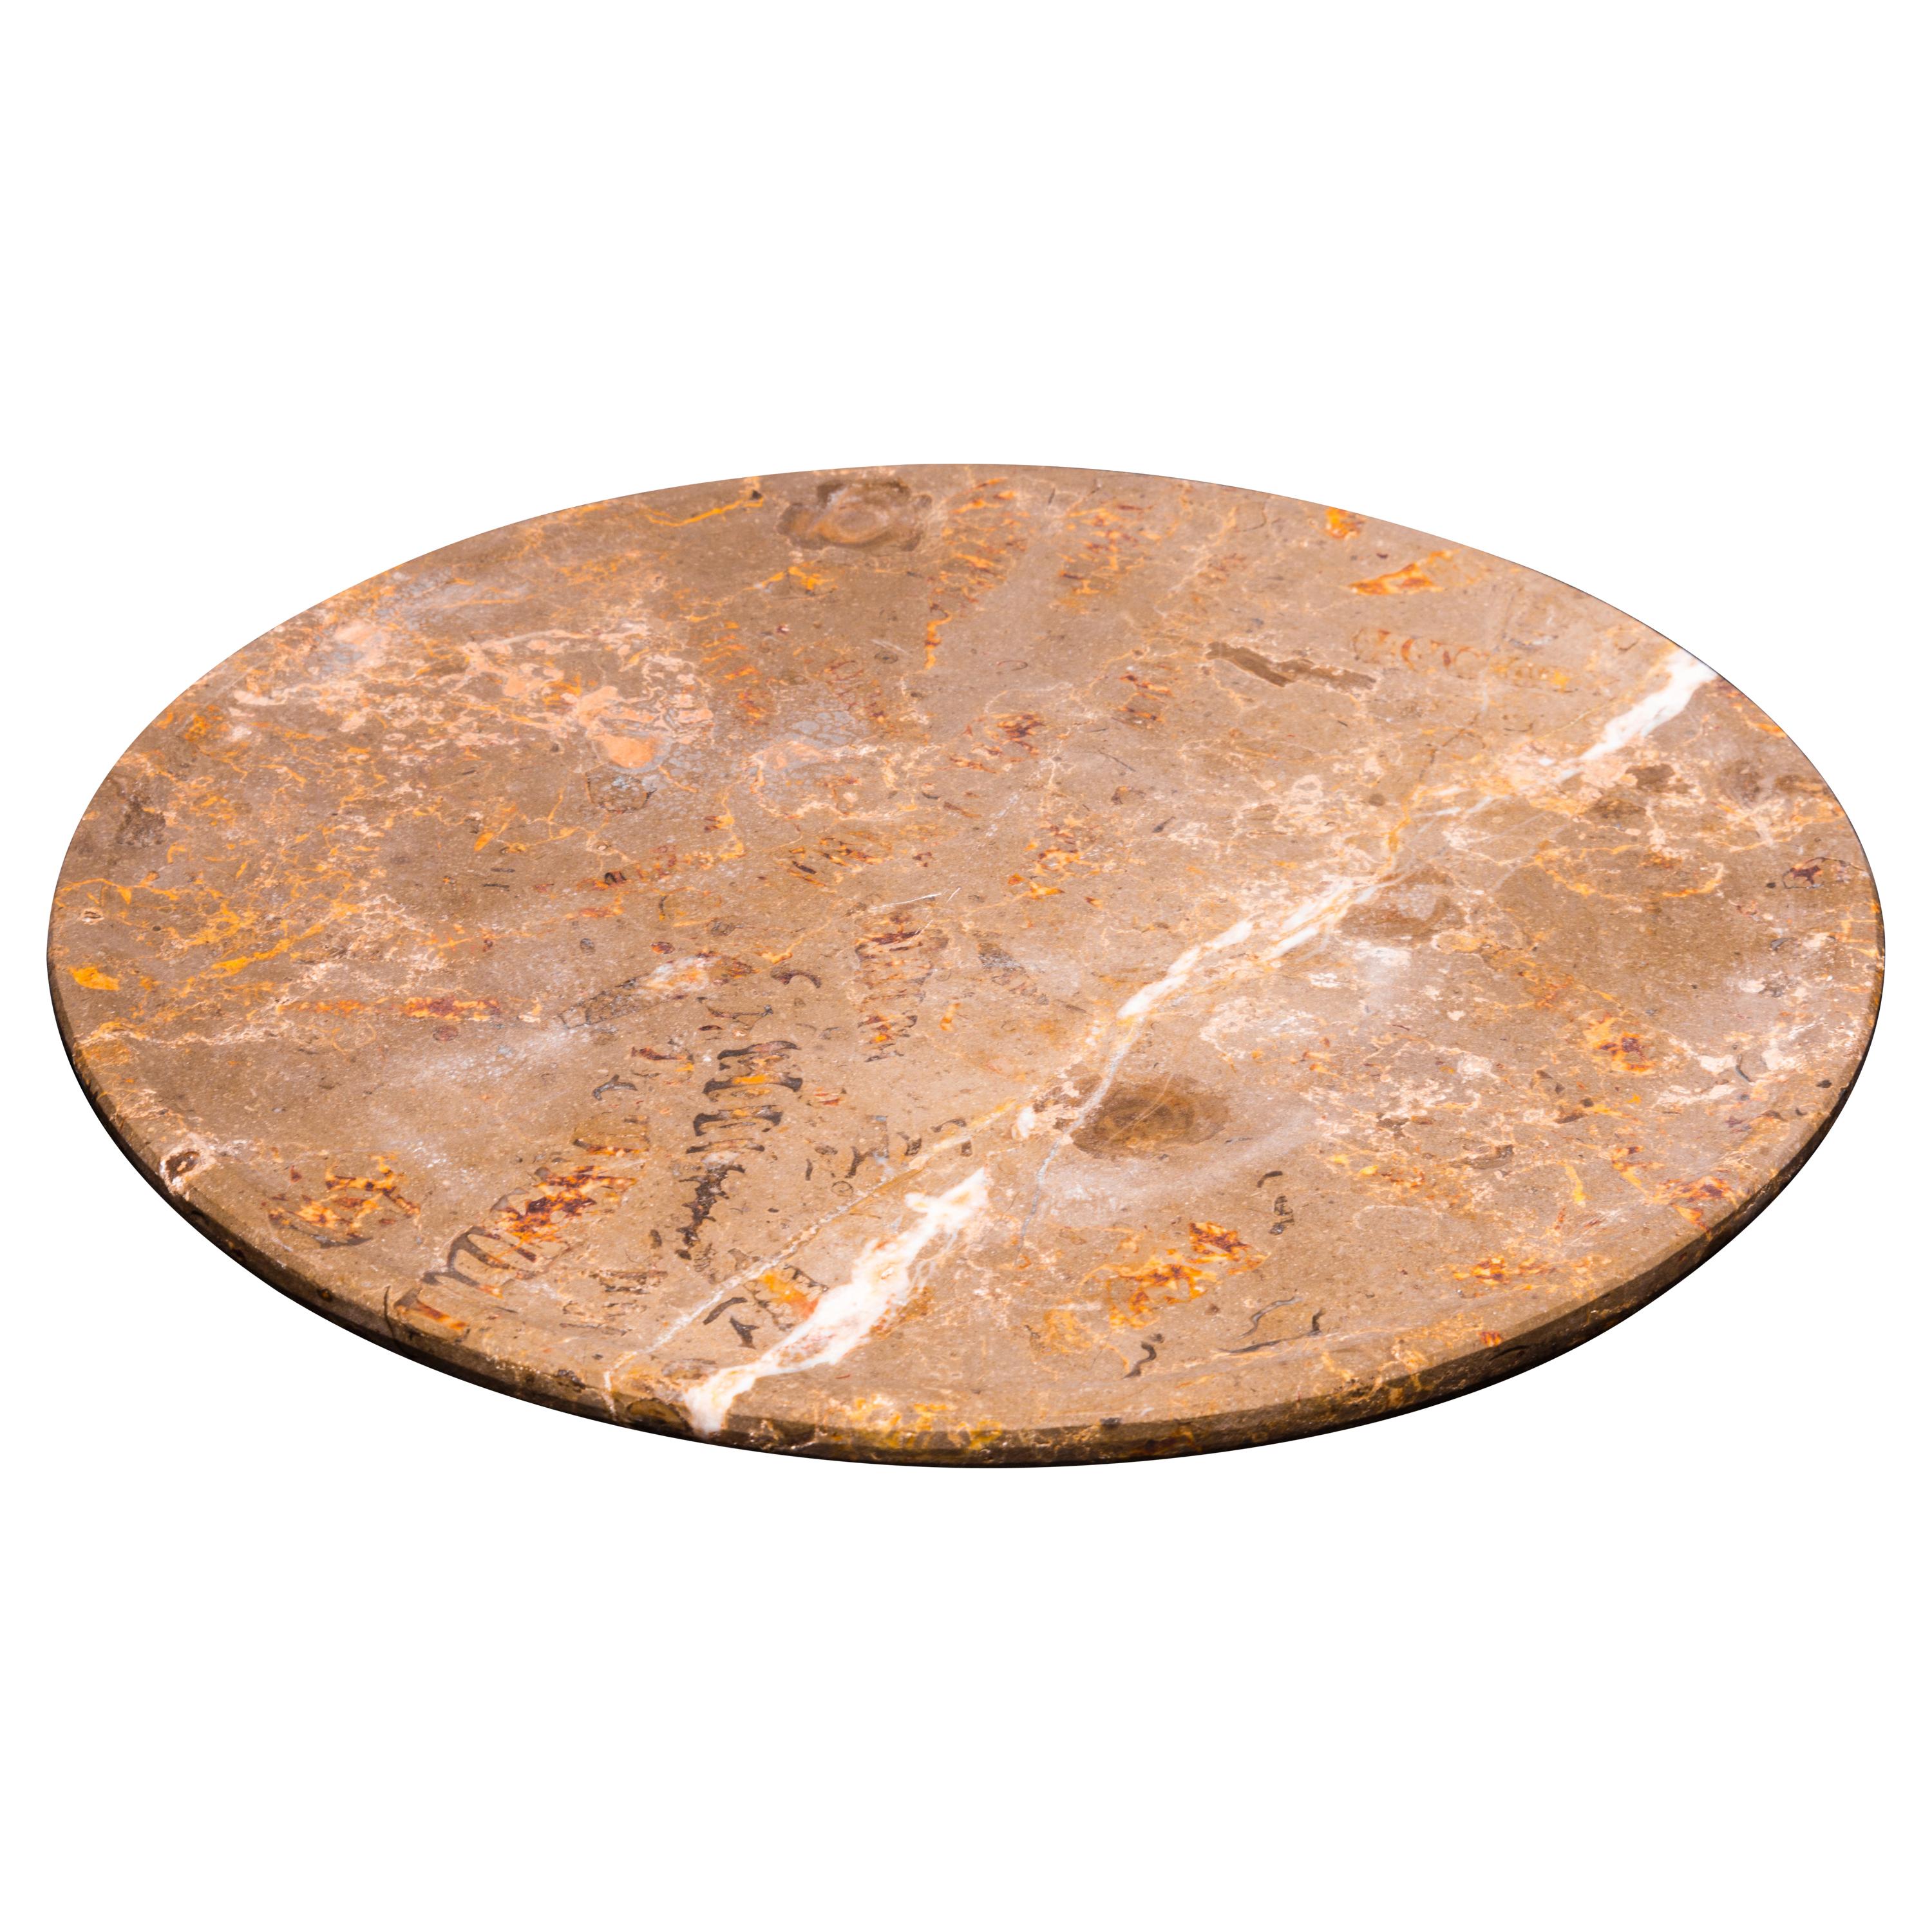 Aina Contemporary Jurassic Fossil Marble Insulam Plate, Living Collection